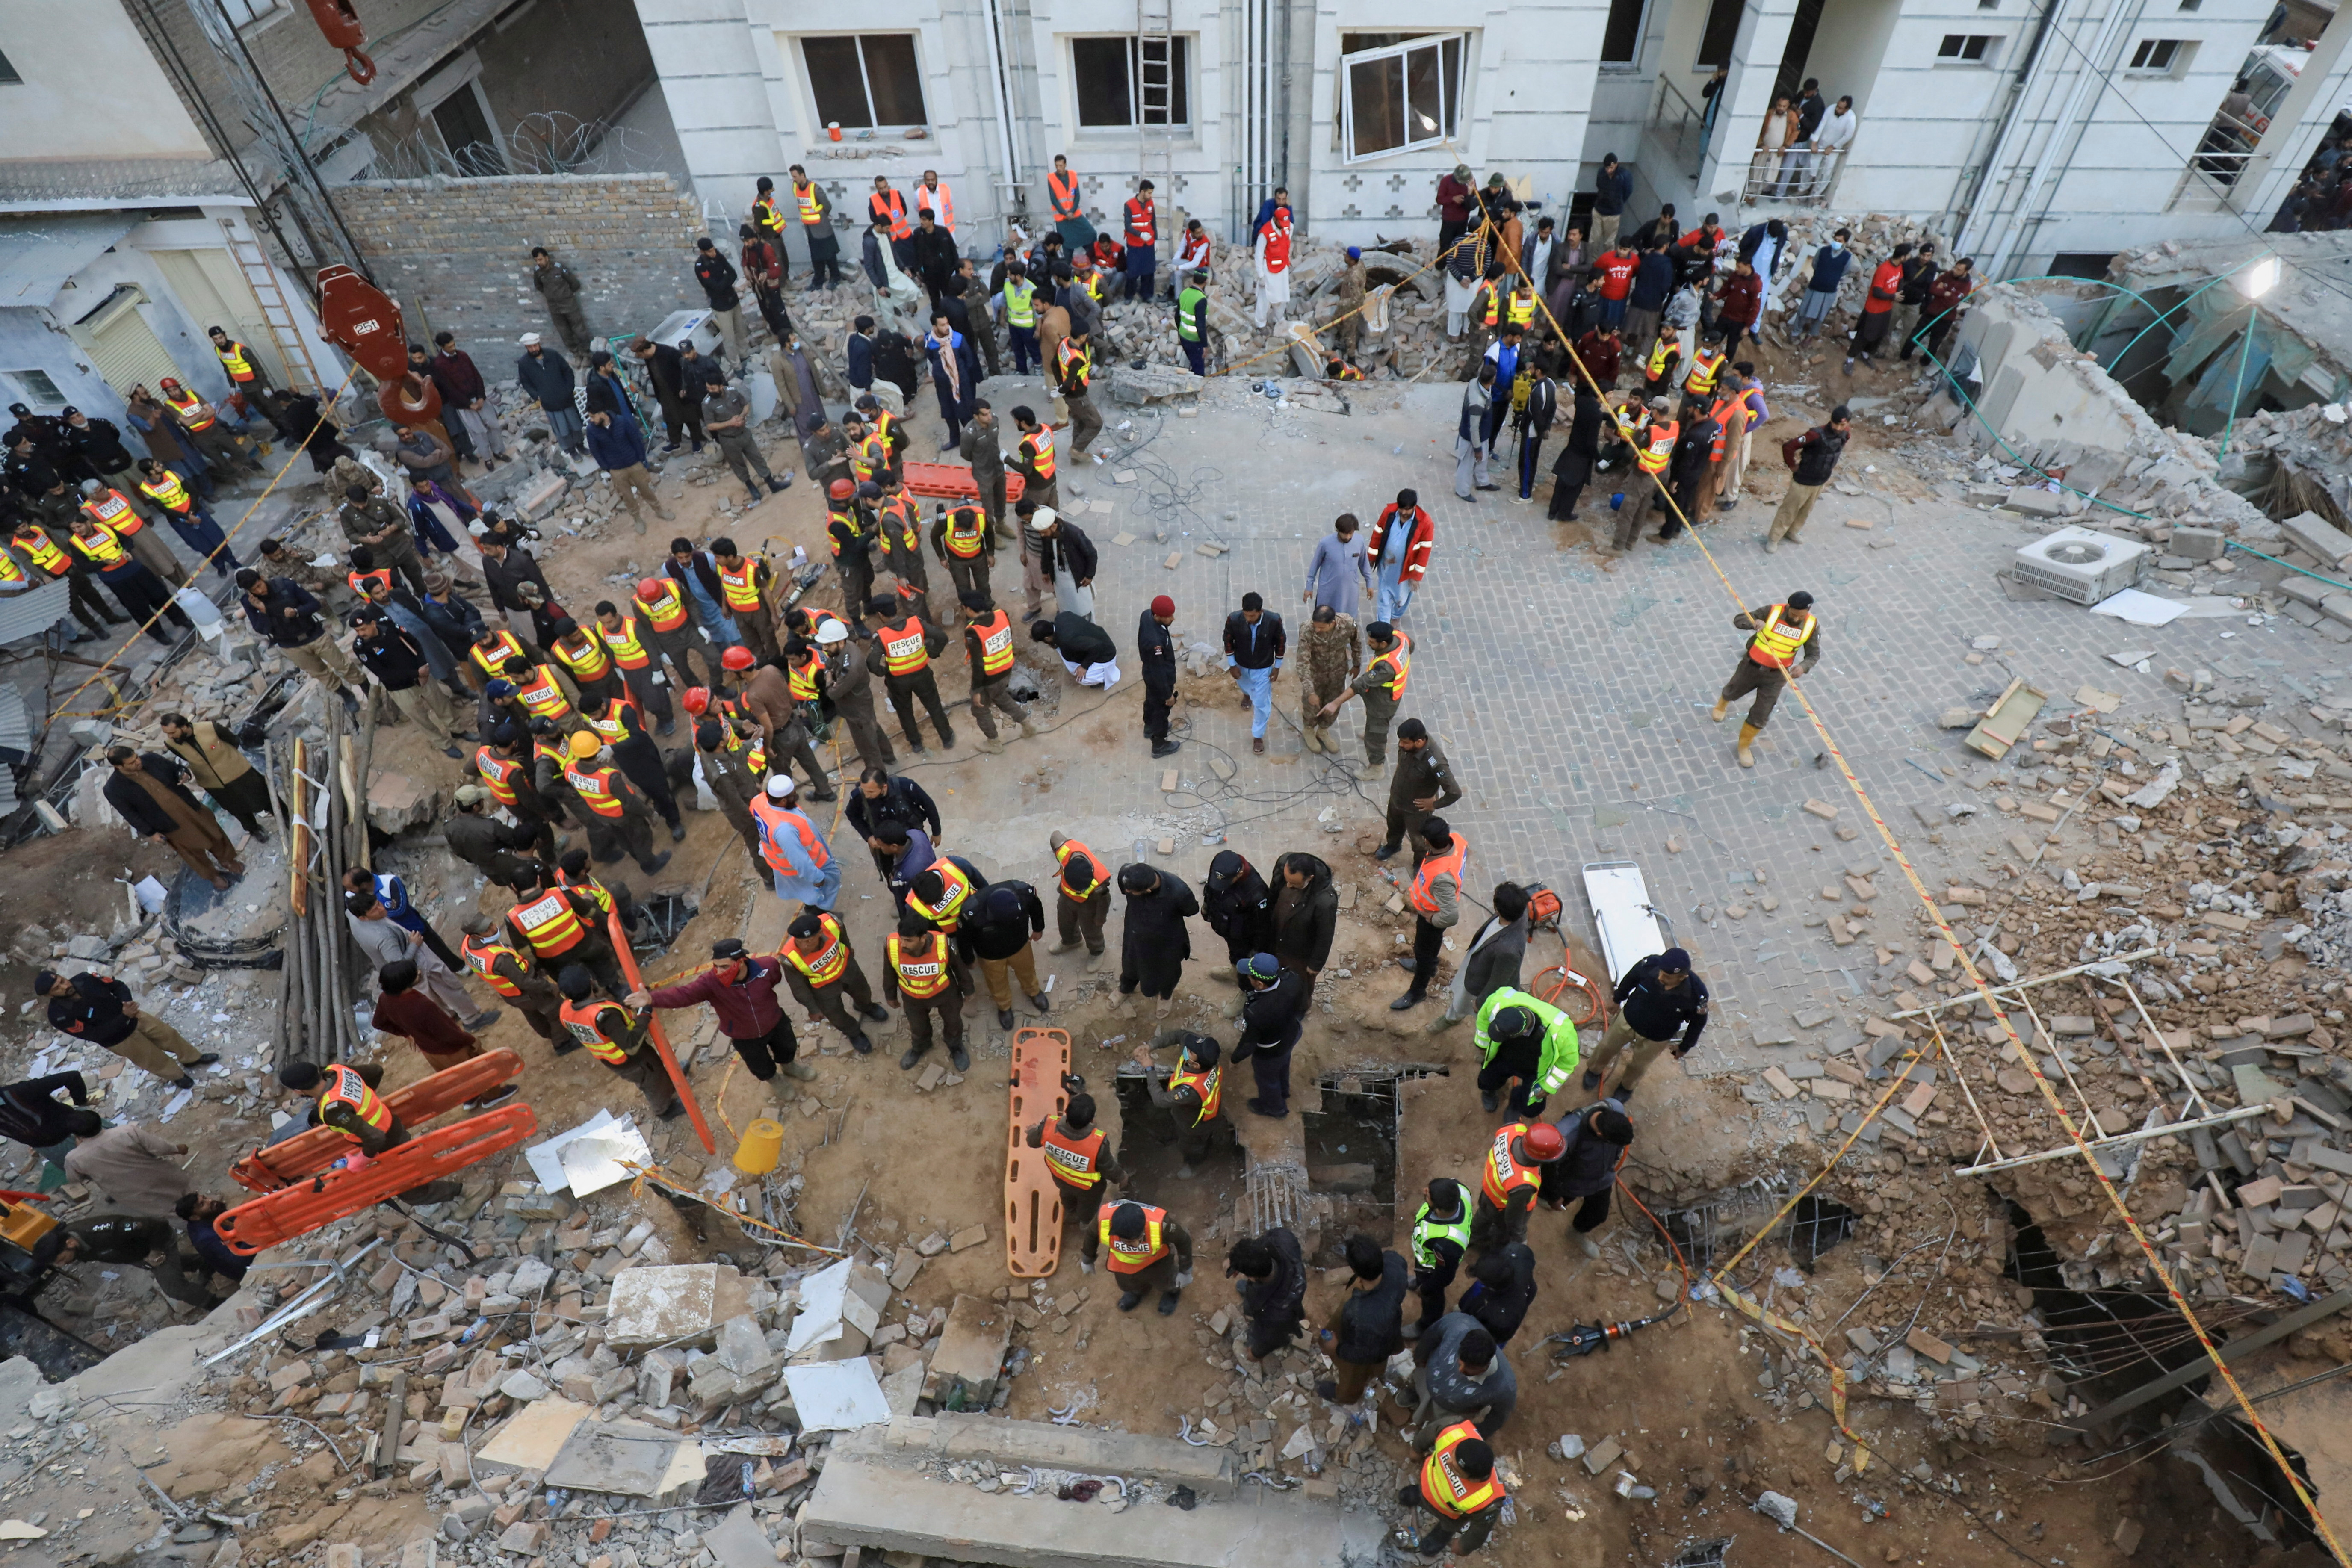 Rescue workers search for survivors after a suicide bombing at a mosque in Peshawar